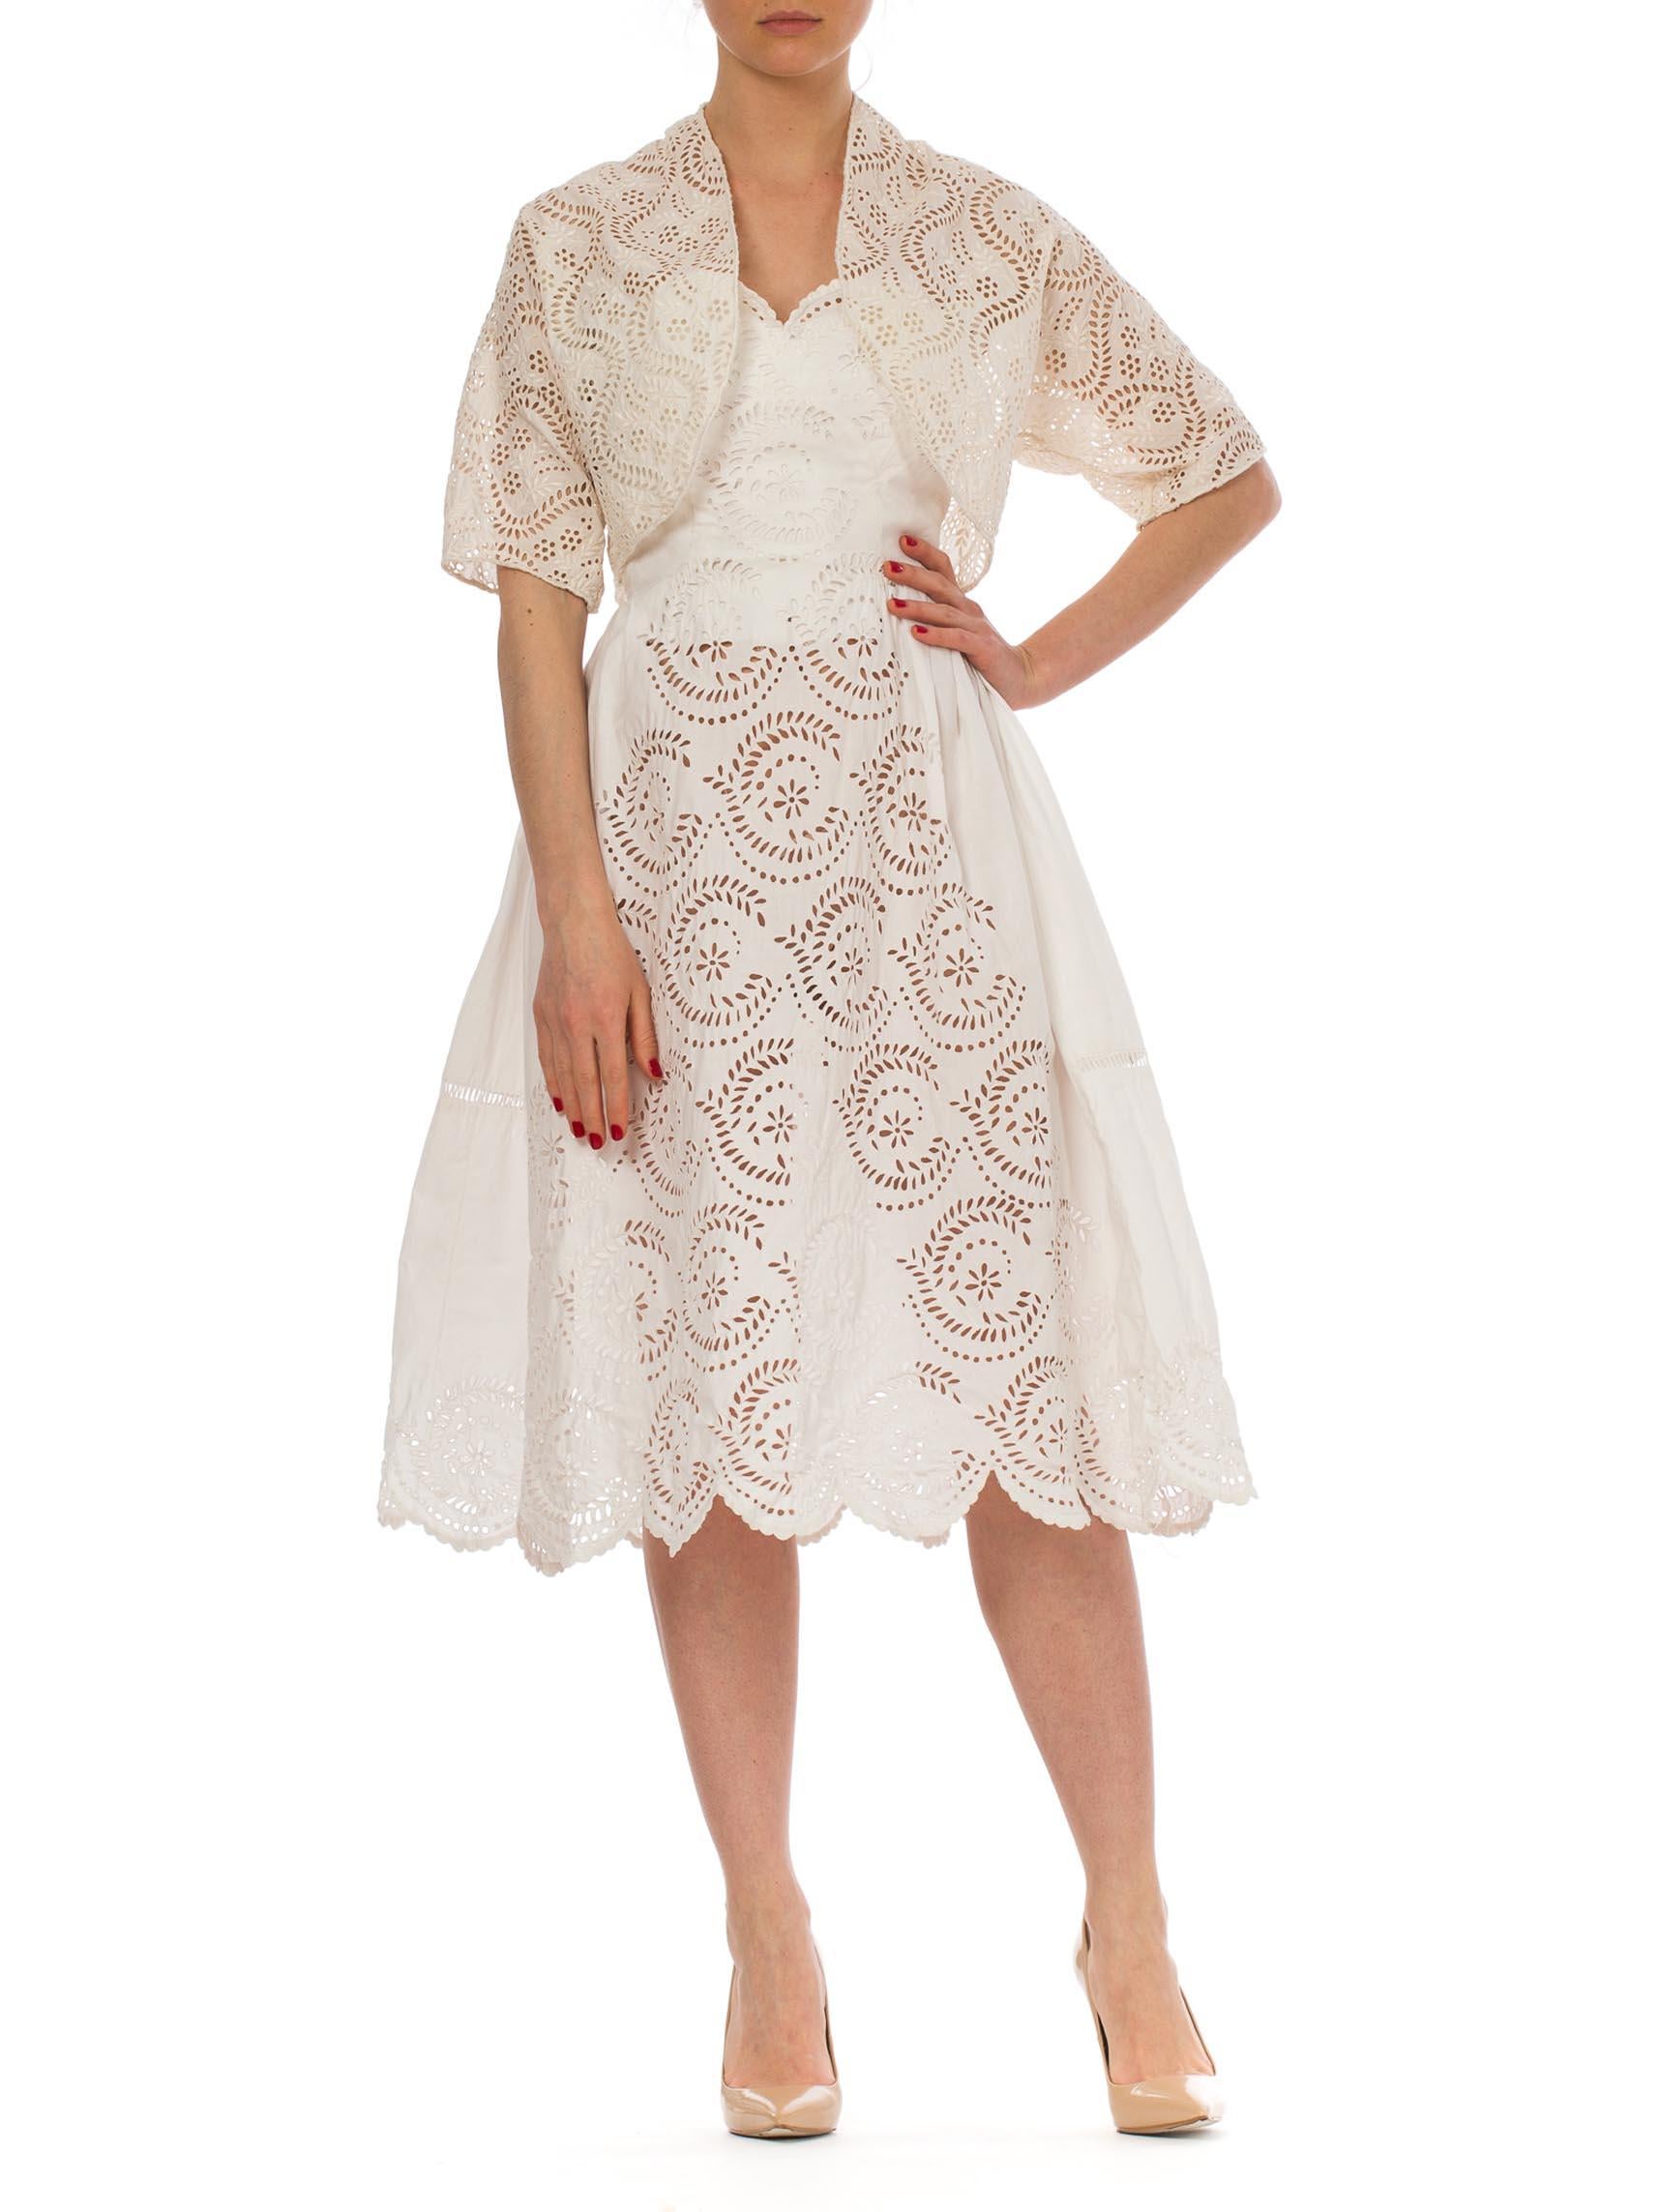 1950S Off White Strapless Dress Made From Victorian Hand Embroidered Cotton Eyelet Lace With Matching Bolero